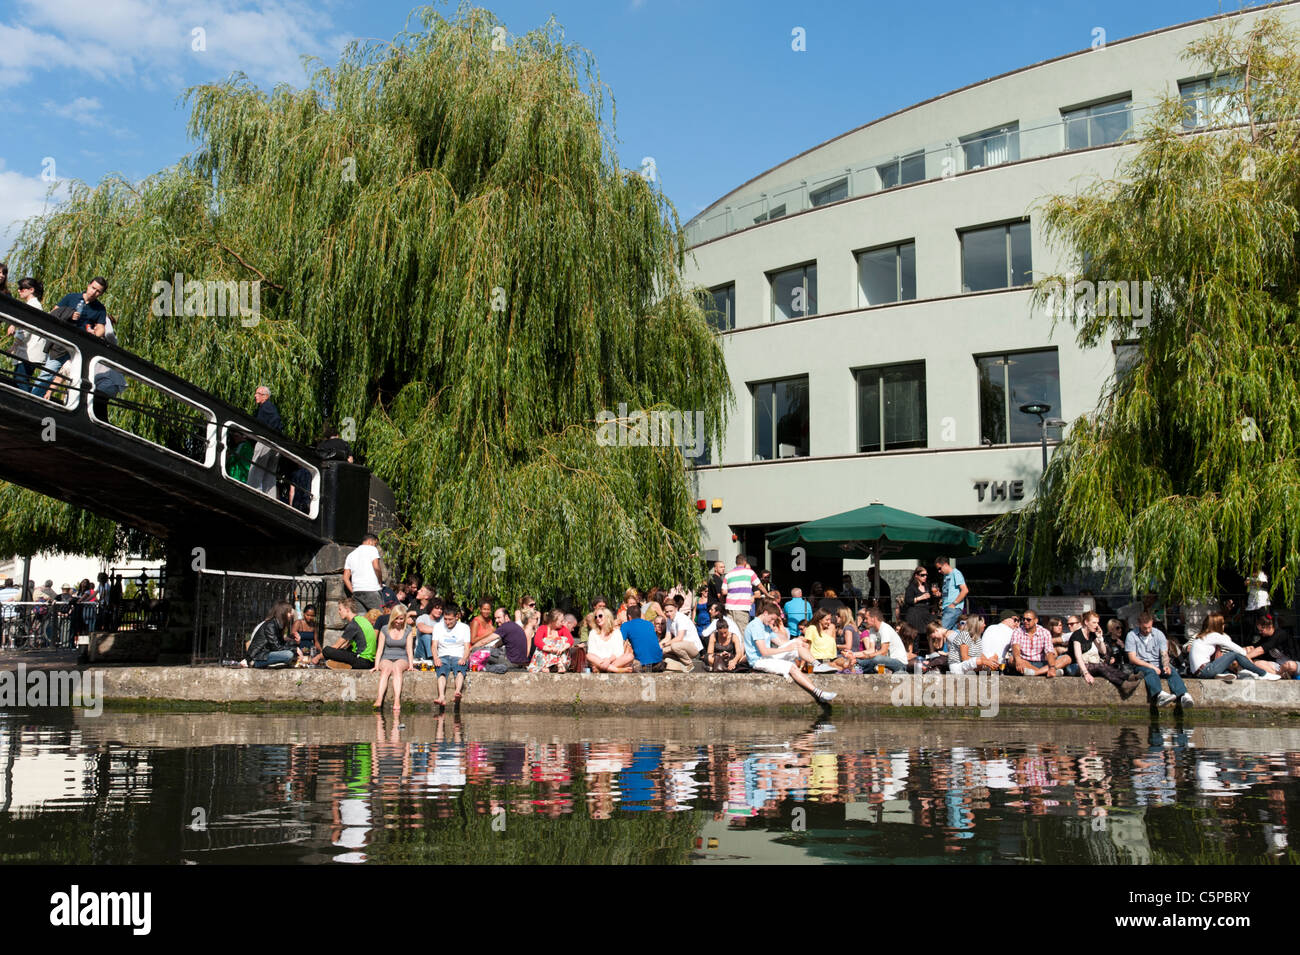 Young people people relaxing outside the Ice Wharf pub on the Regent's Canal in Camden Town, London, UK Stock Photo